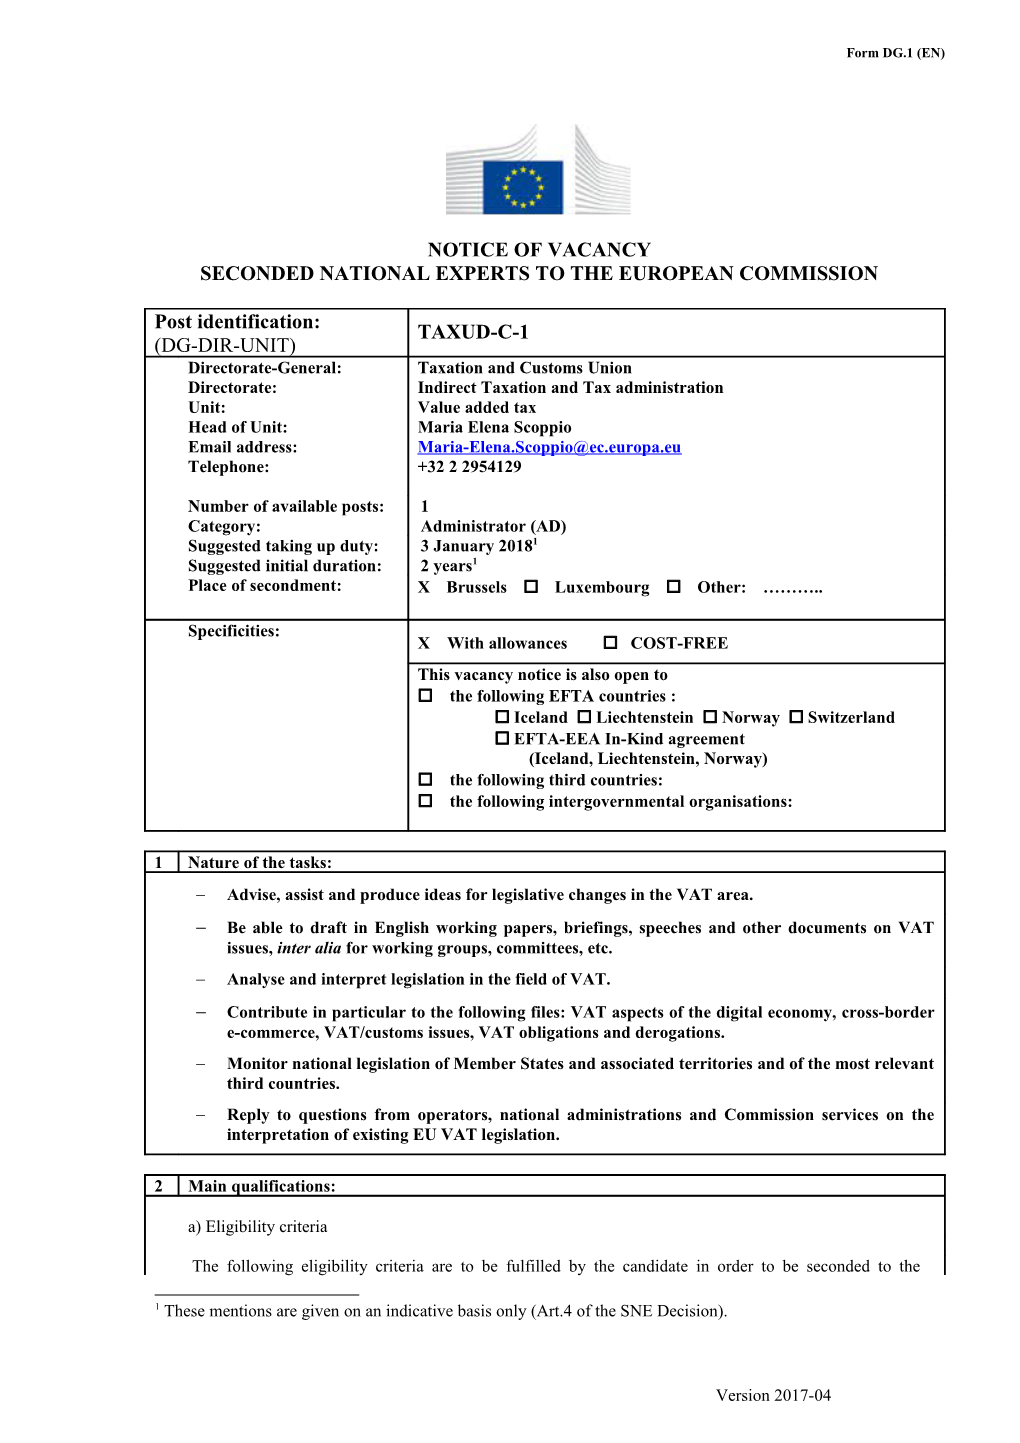 Notice of Vacancy Seconded National Experts to the European Commission